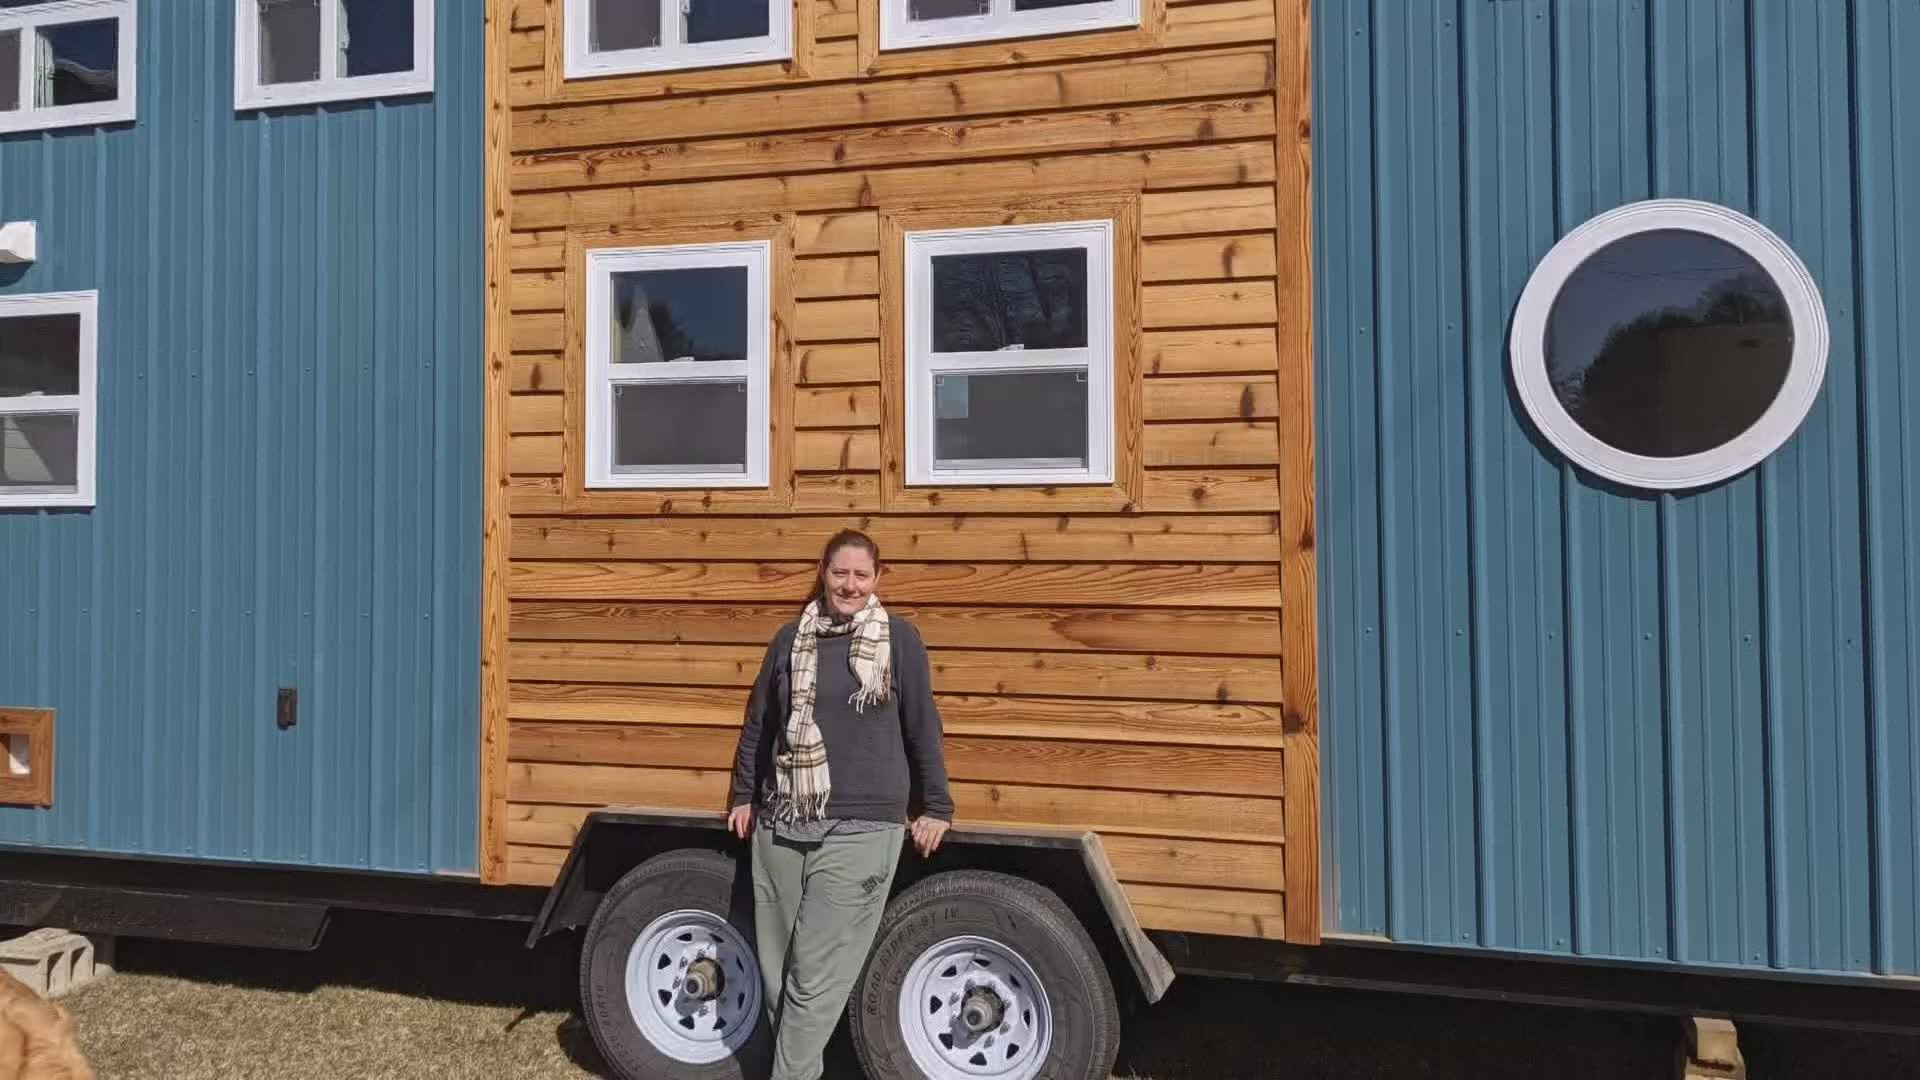 Fed up with the housing market, Sara Simon had a tiny house built in 2020. However, she cannot find a place to permanently and legally place it.